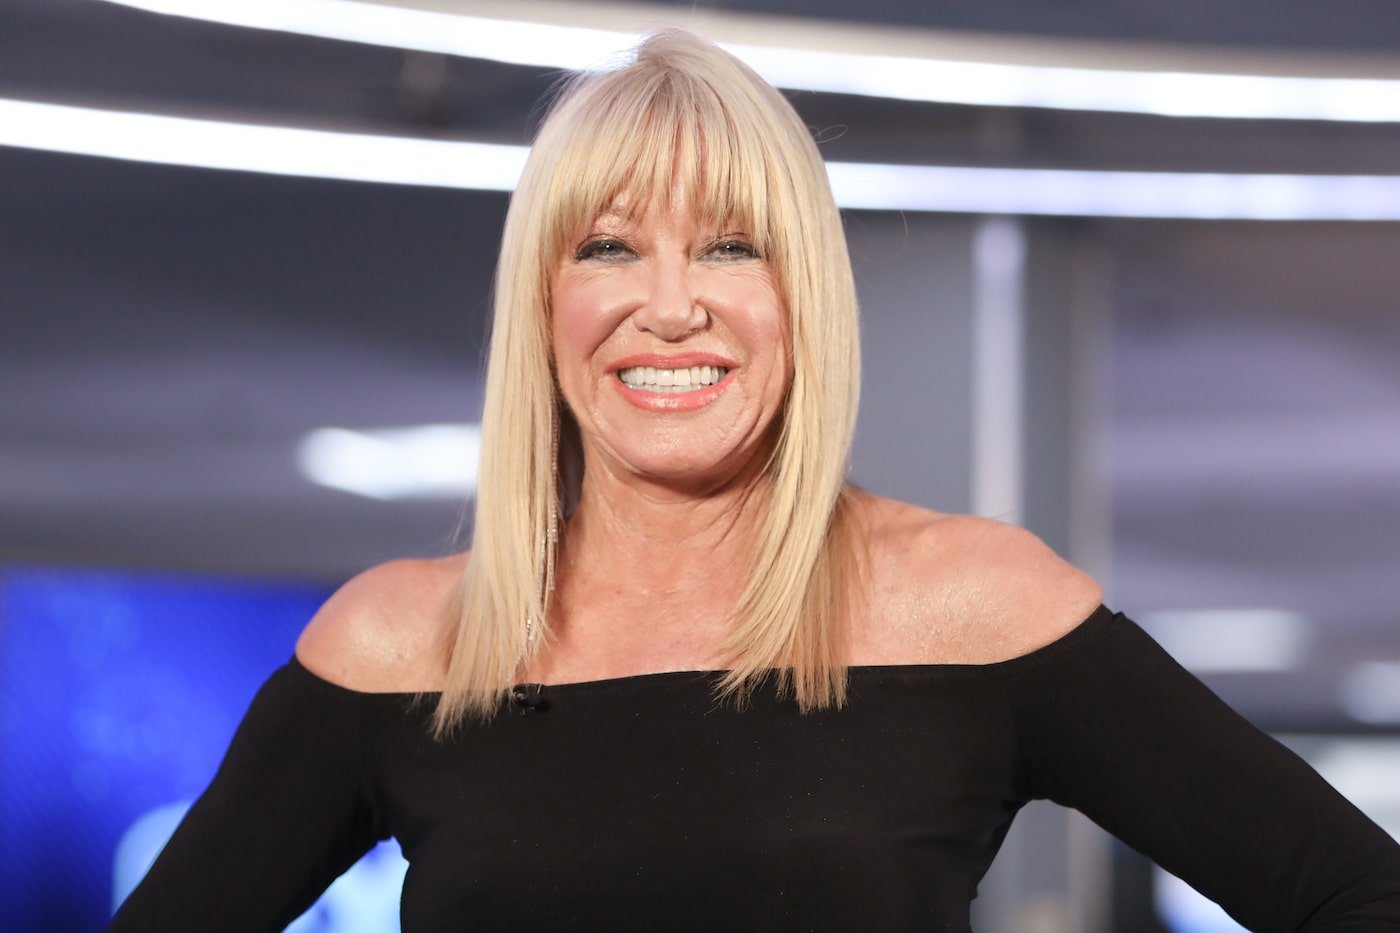 Suzanne Somers Said Doing Playboy Was On Her 77th Birthday Bucket List